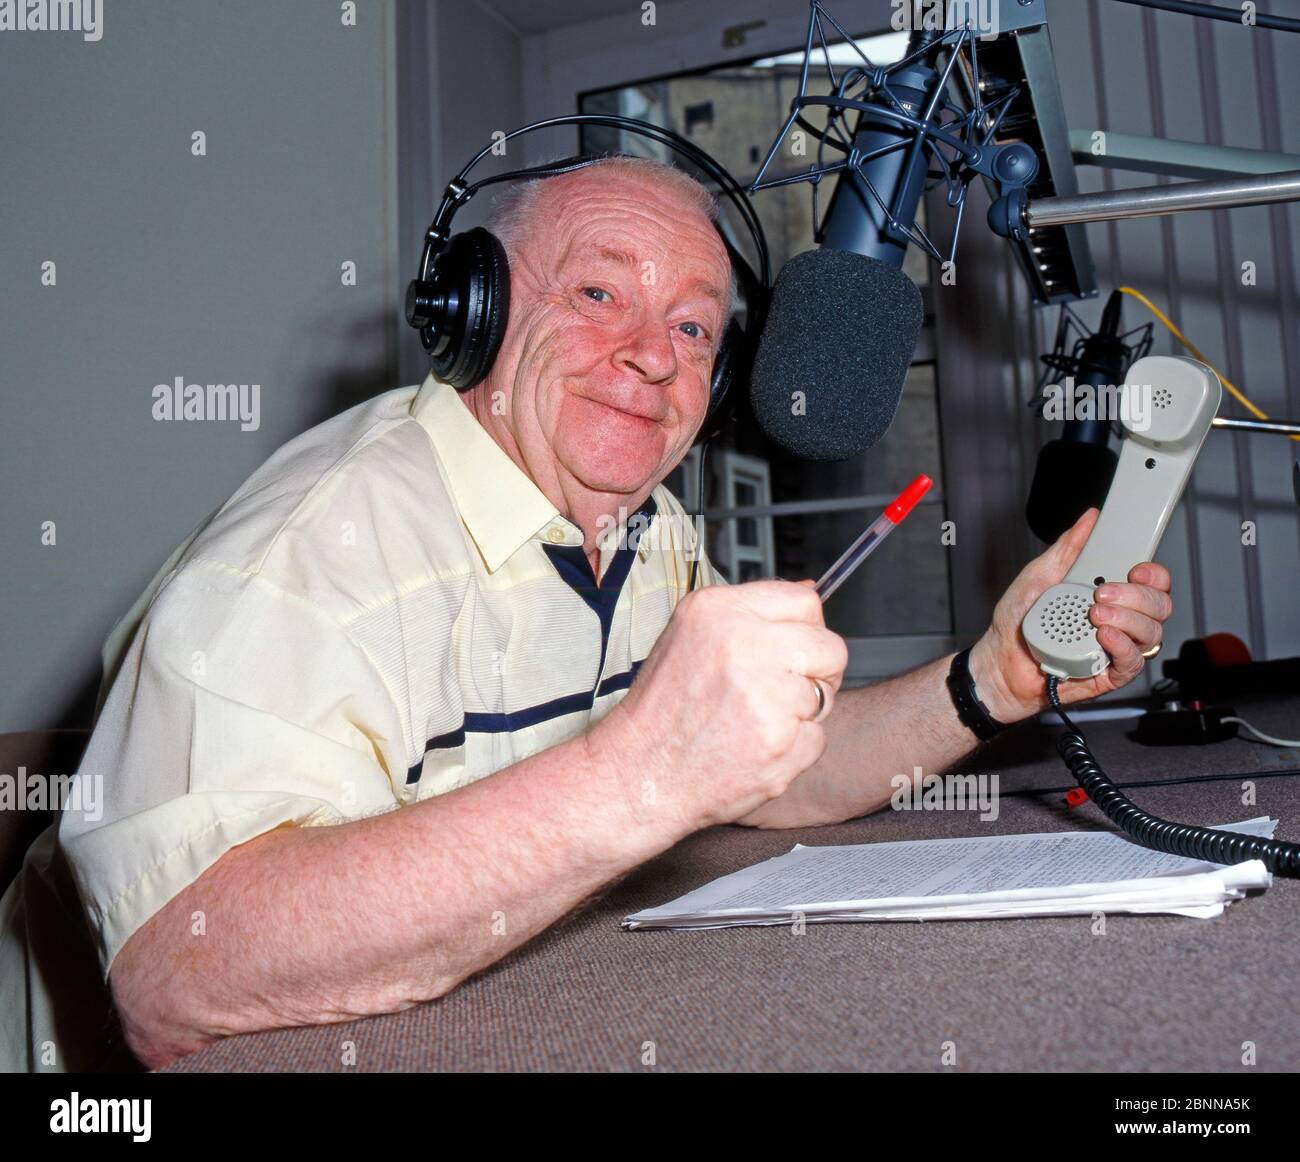 The popular Leipzig actor, cabaret artist and radio presenter Manfred Uhlig, also a loyal supporter of BSG Chemie Leipzig, moderates humorously in a Leipzig radio studio Stock Photo